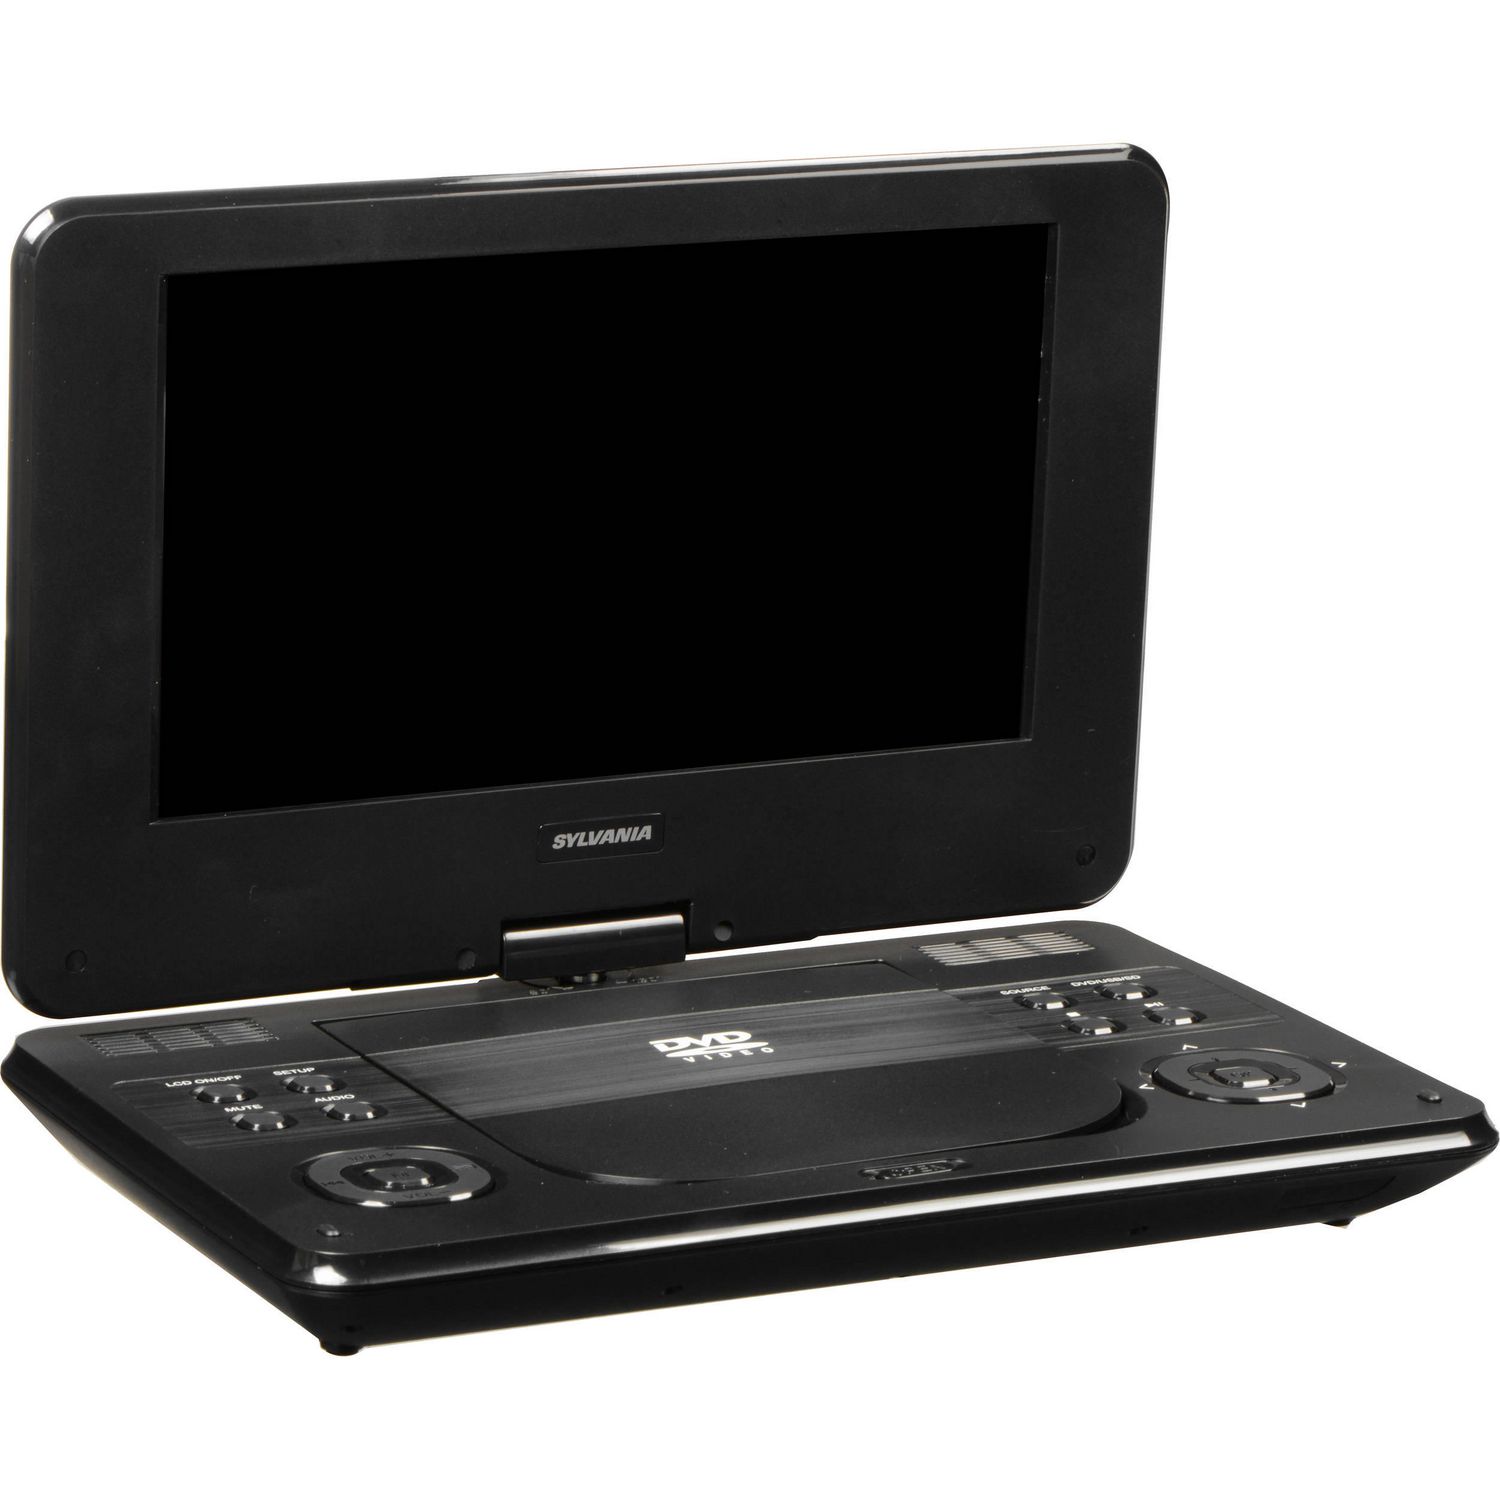 portable dvd player for mac